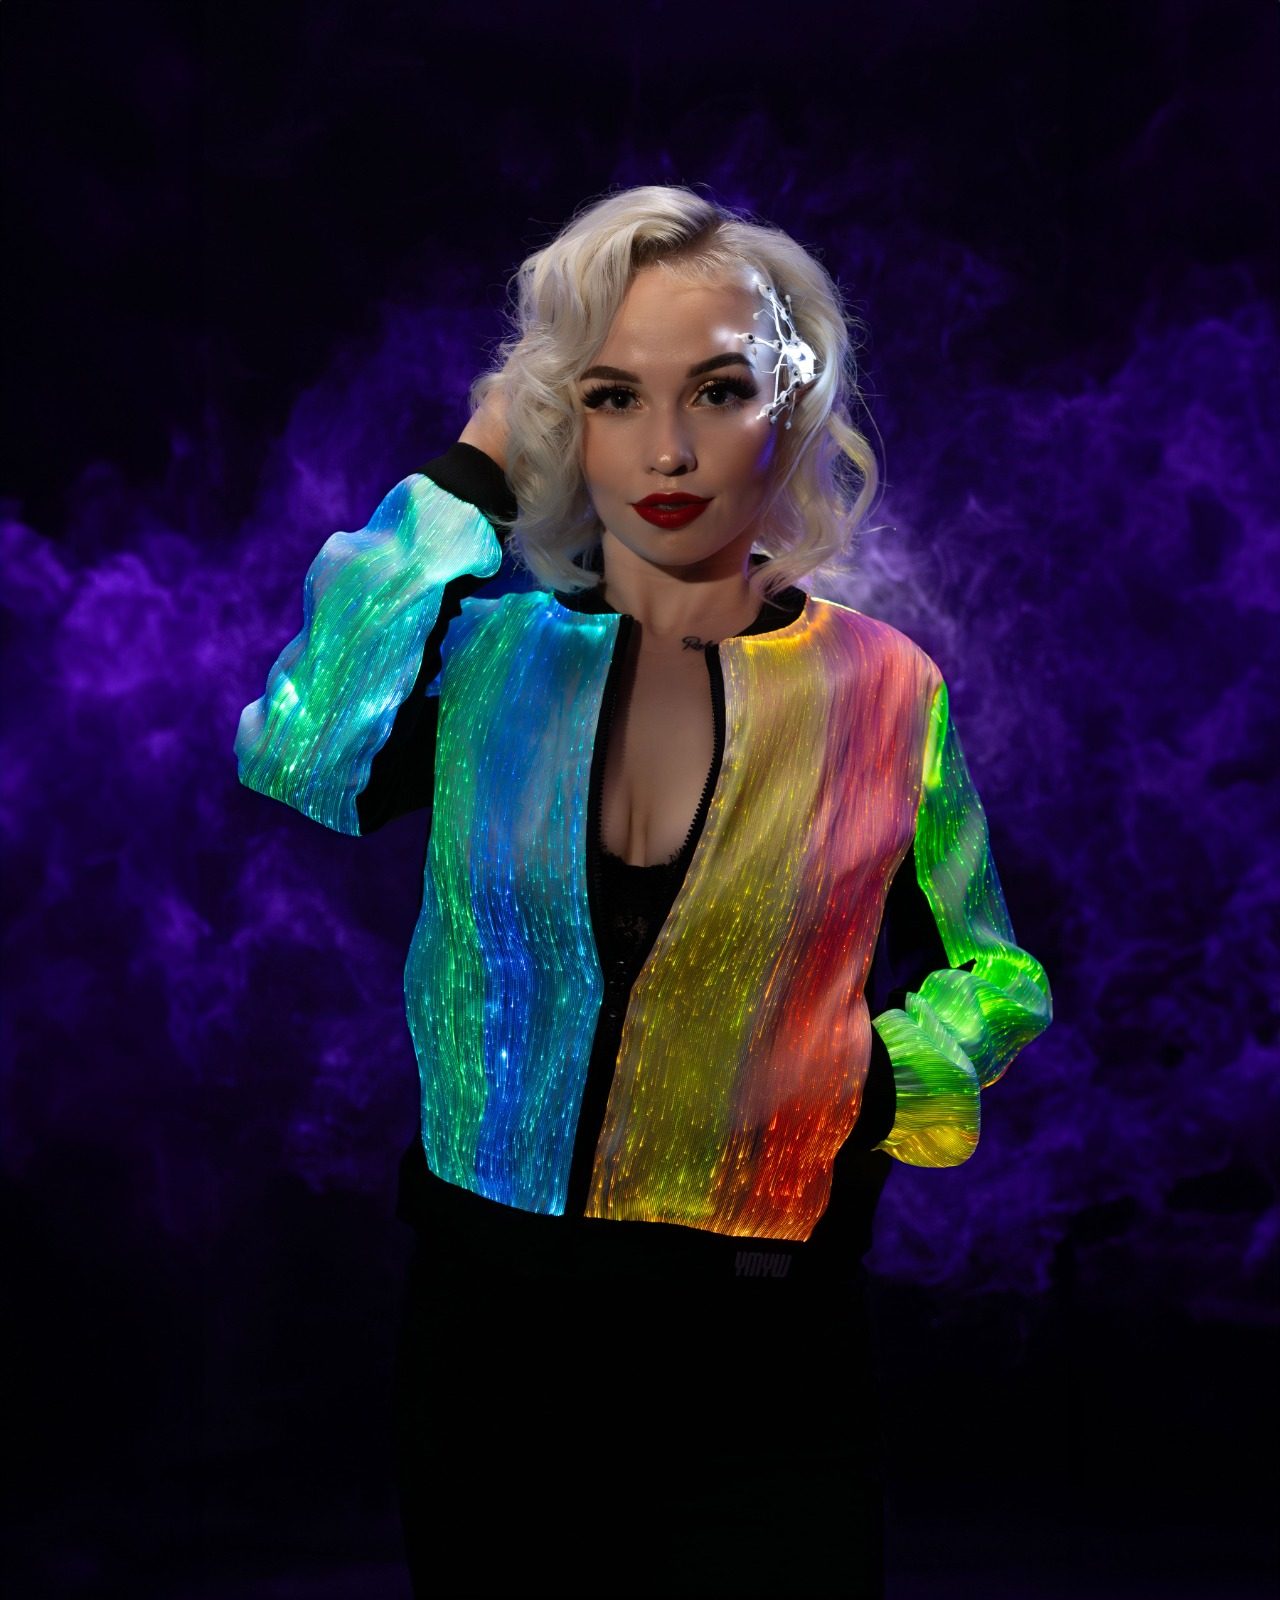 Rave Outfits Christmas Fashion, Light Up clothing, Light up hoodie | Your Mind Your World